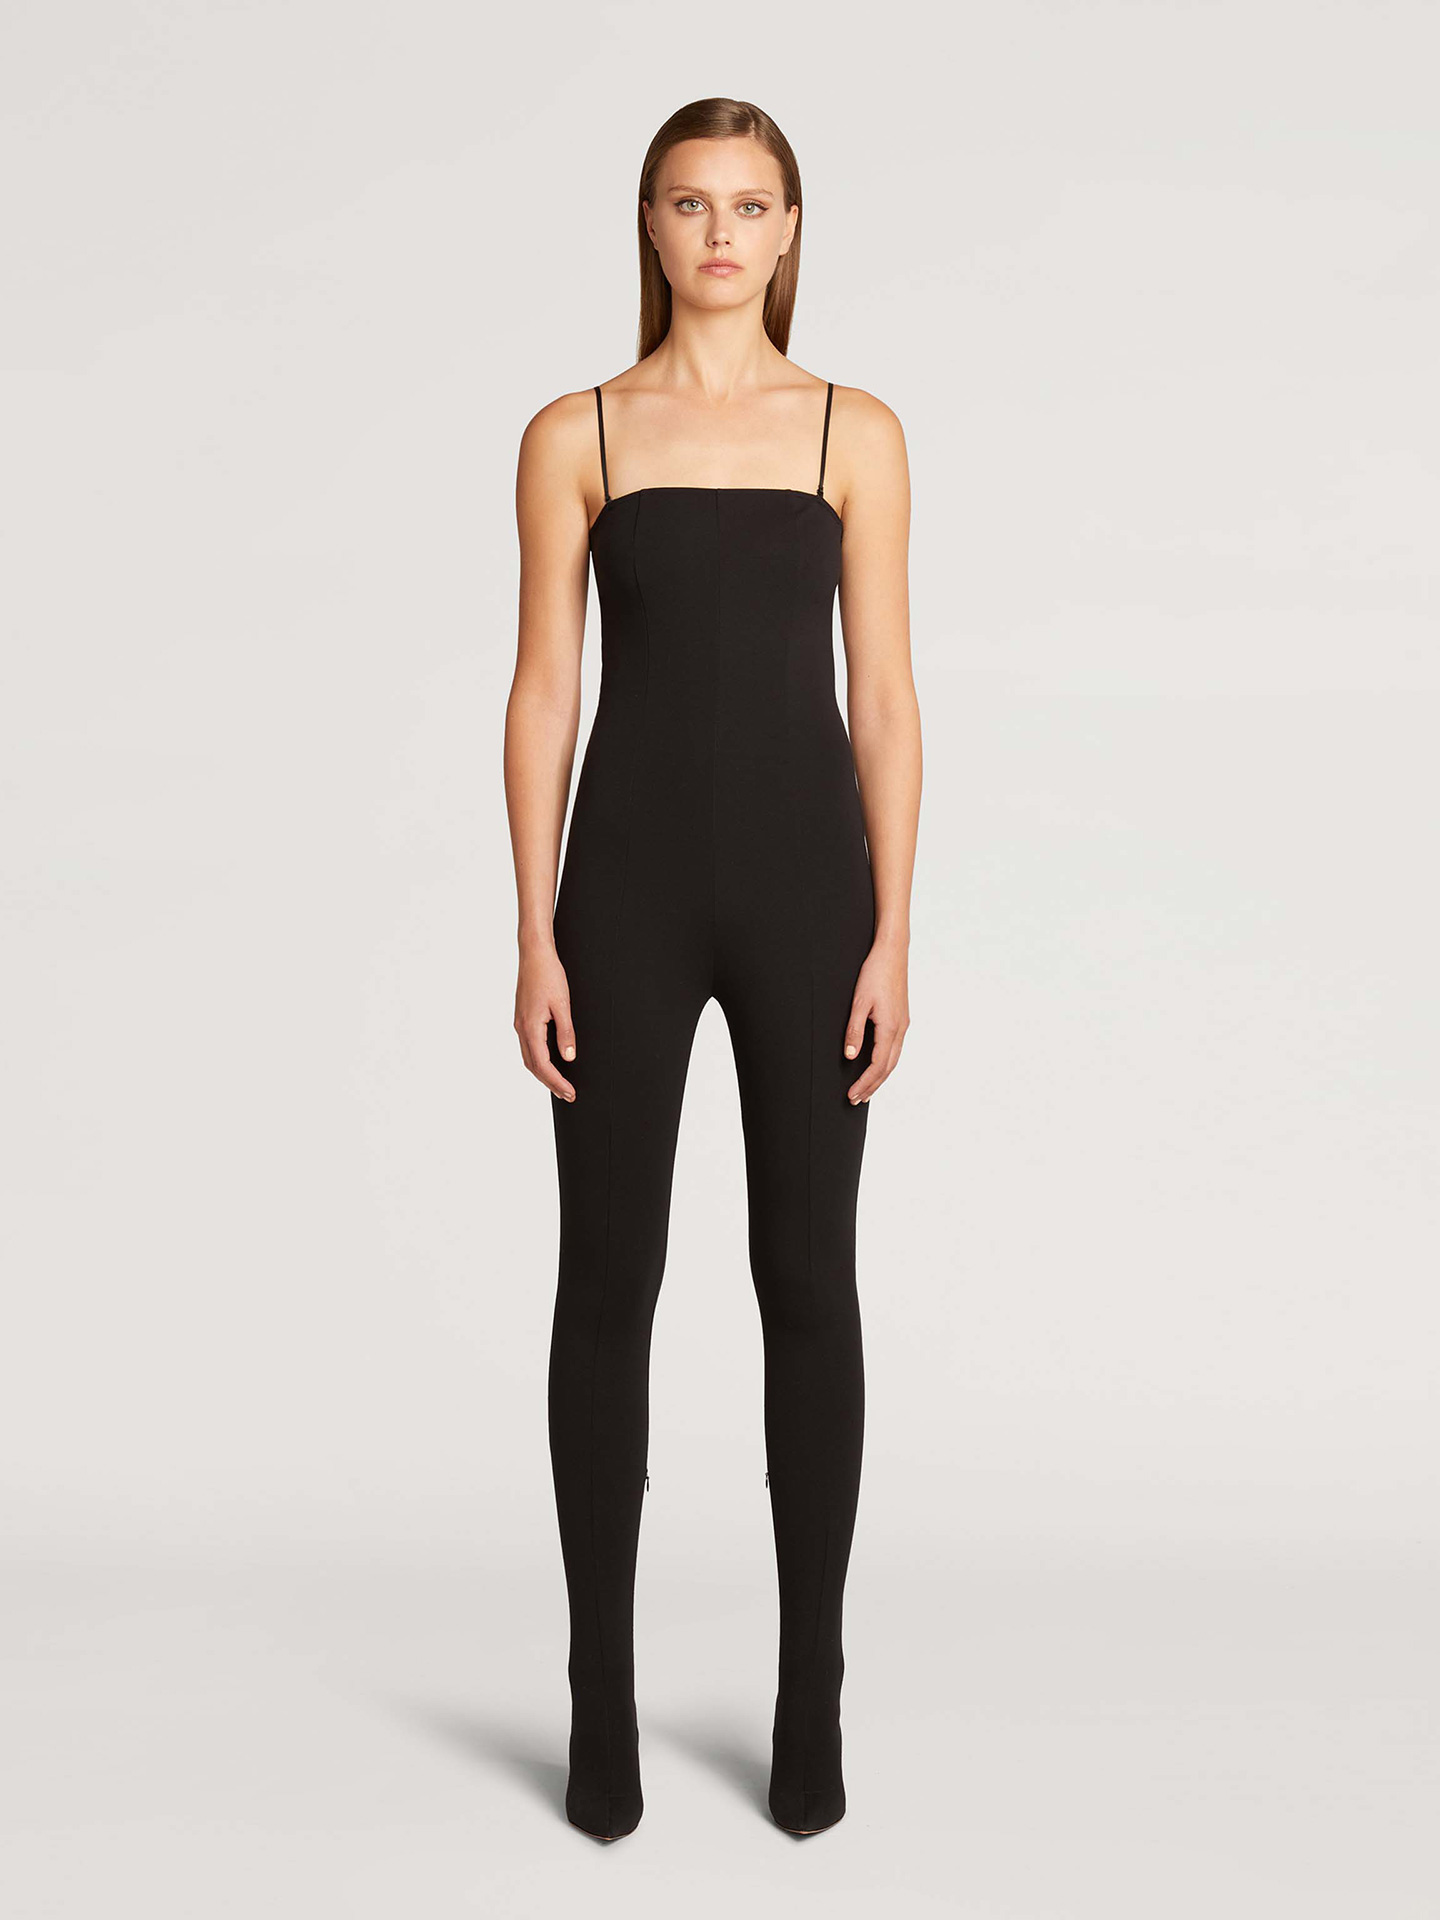 Wolford - Catsuit with shoes, Frau, black, Größe: XS36 von Wolford